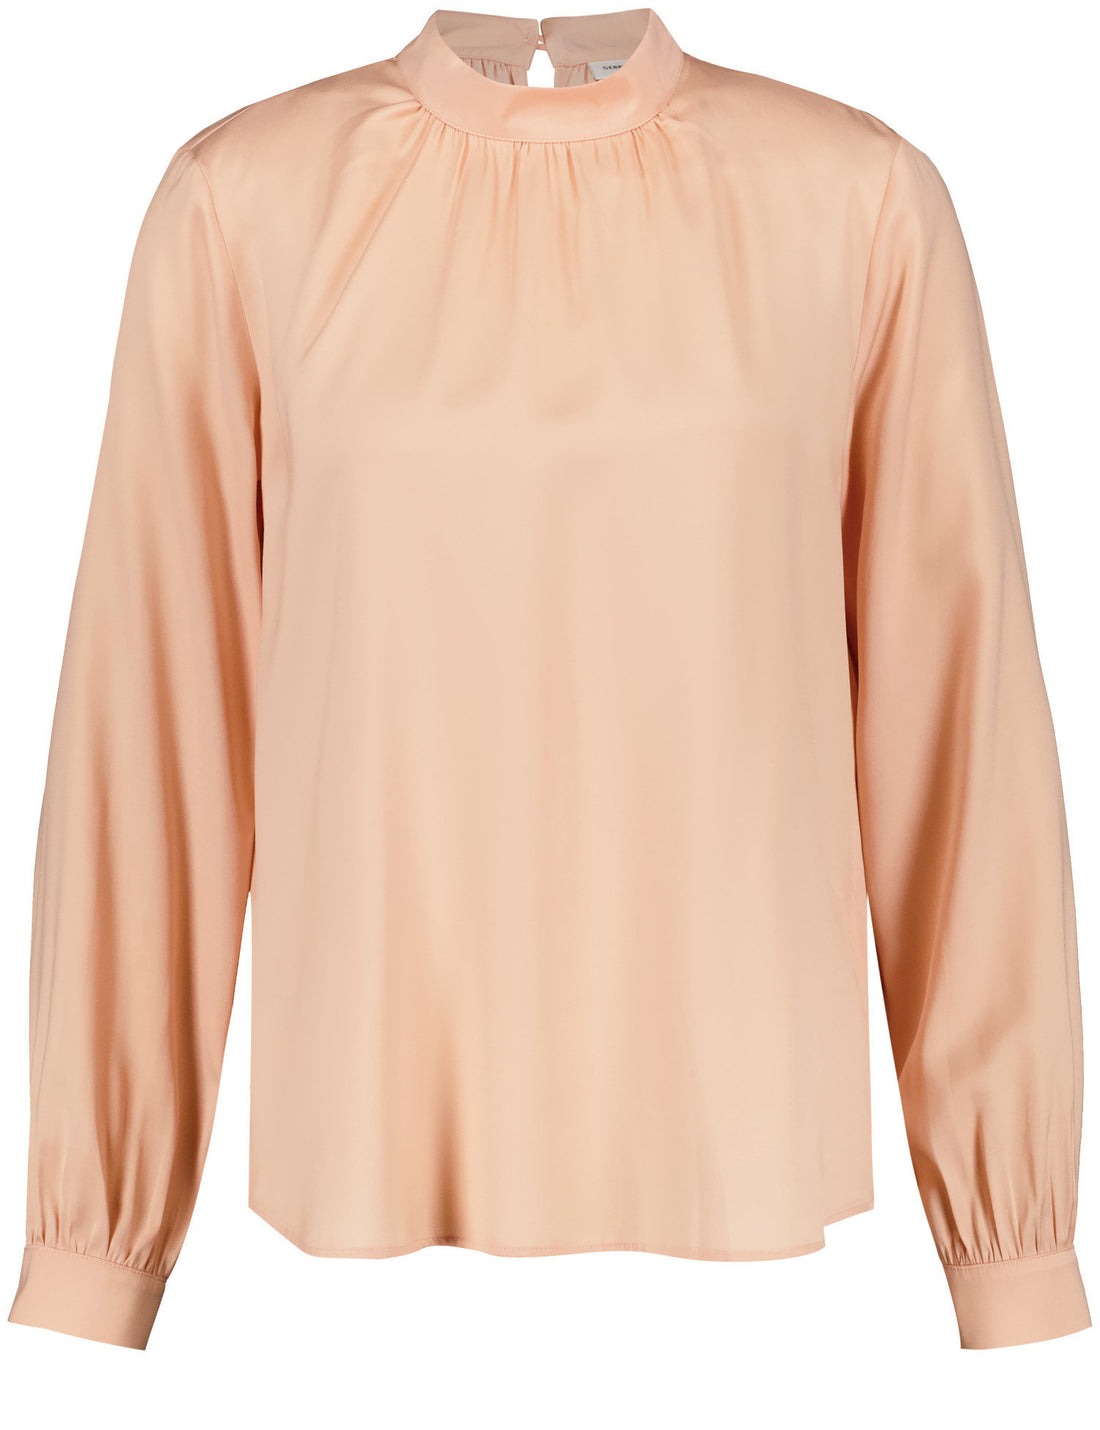 Flowing Blouse With A Stand-Up Collar_360067-31460_60709_02